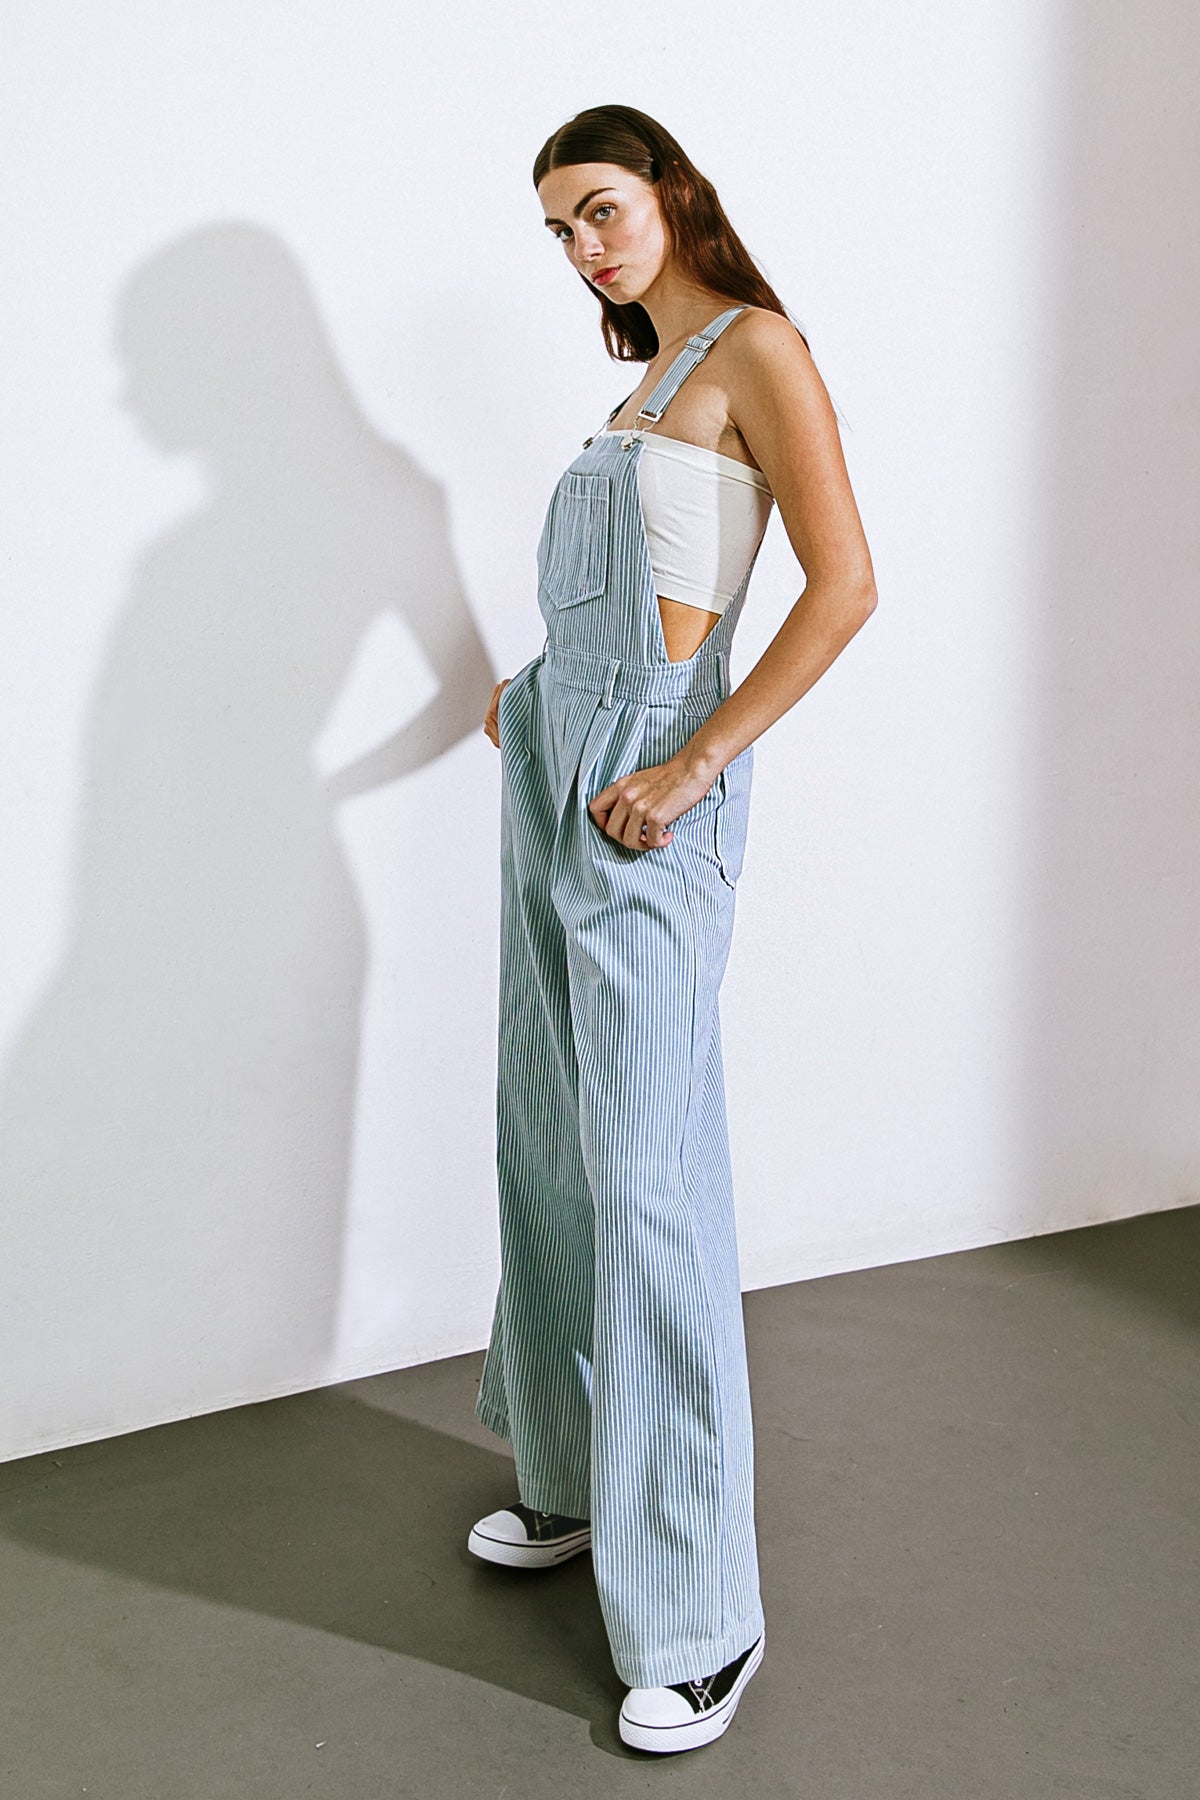 DANCING WITH YOU DENIM JUMPSUIT